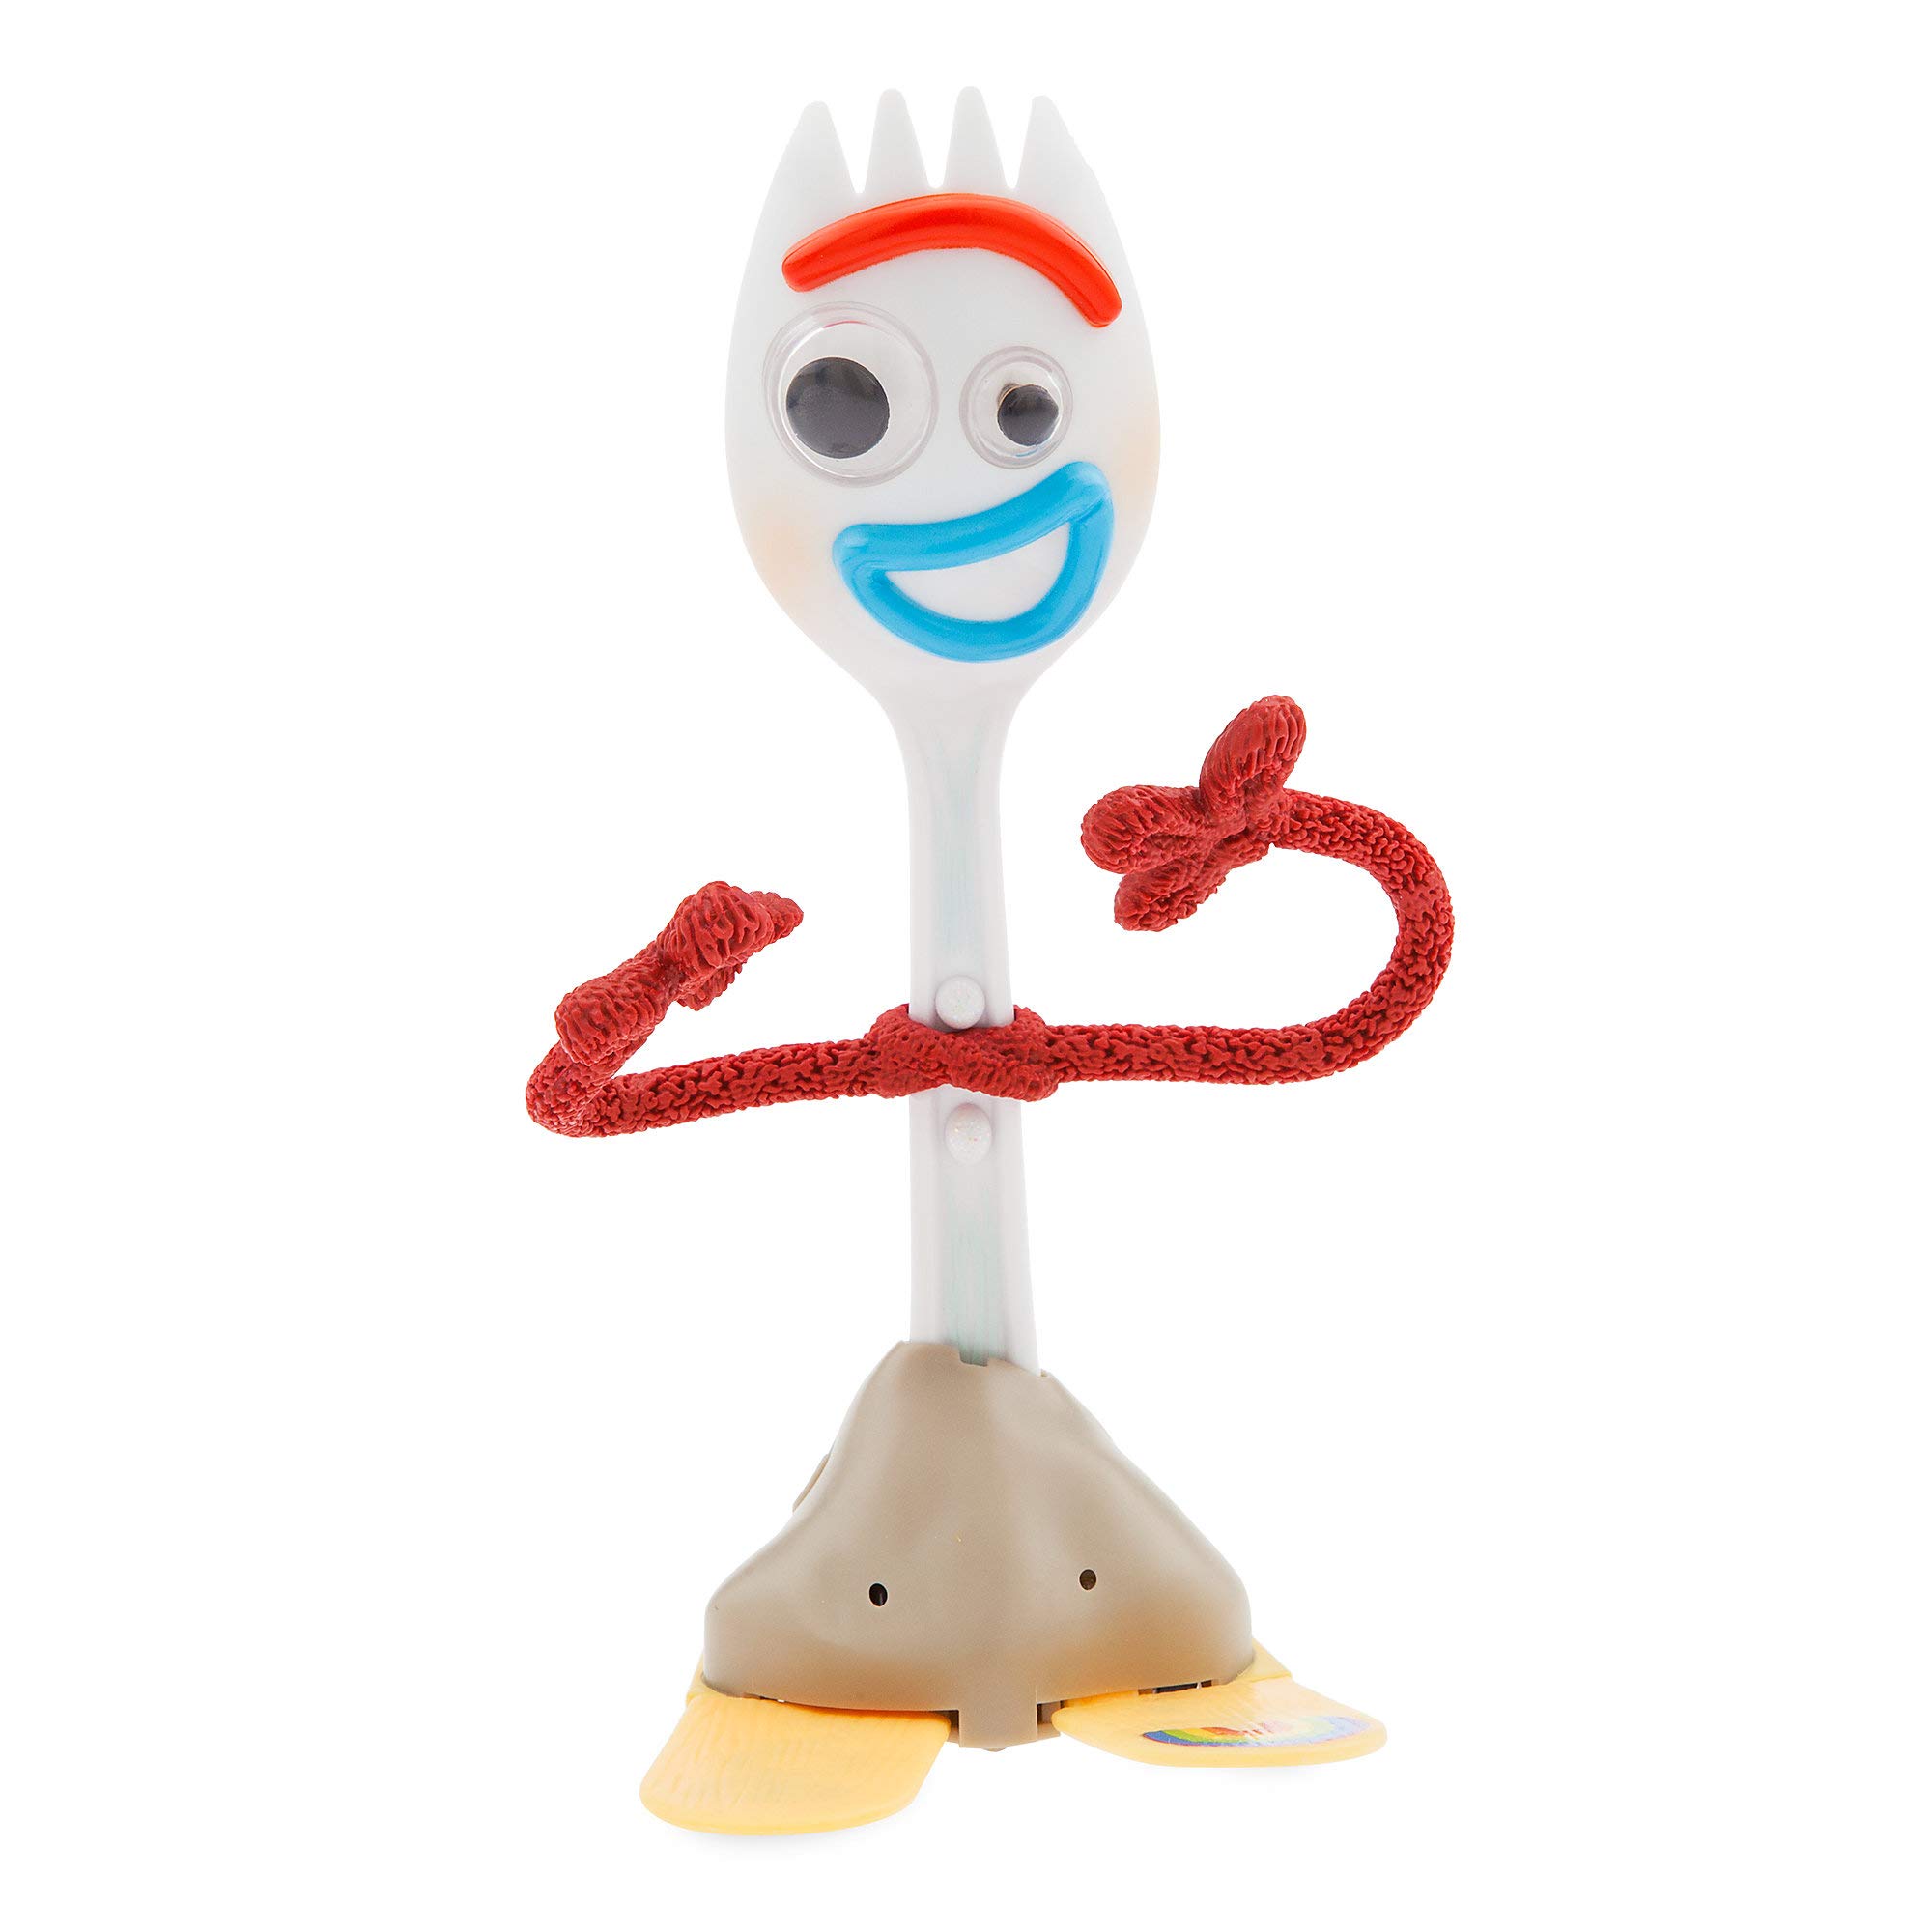 Book Cover Disney Pixar Toy Story 4 - Forky Interactive Talking Action Figure - 7 ¼ Inches